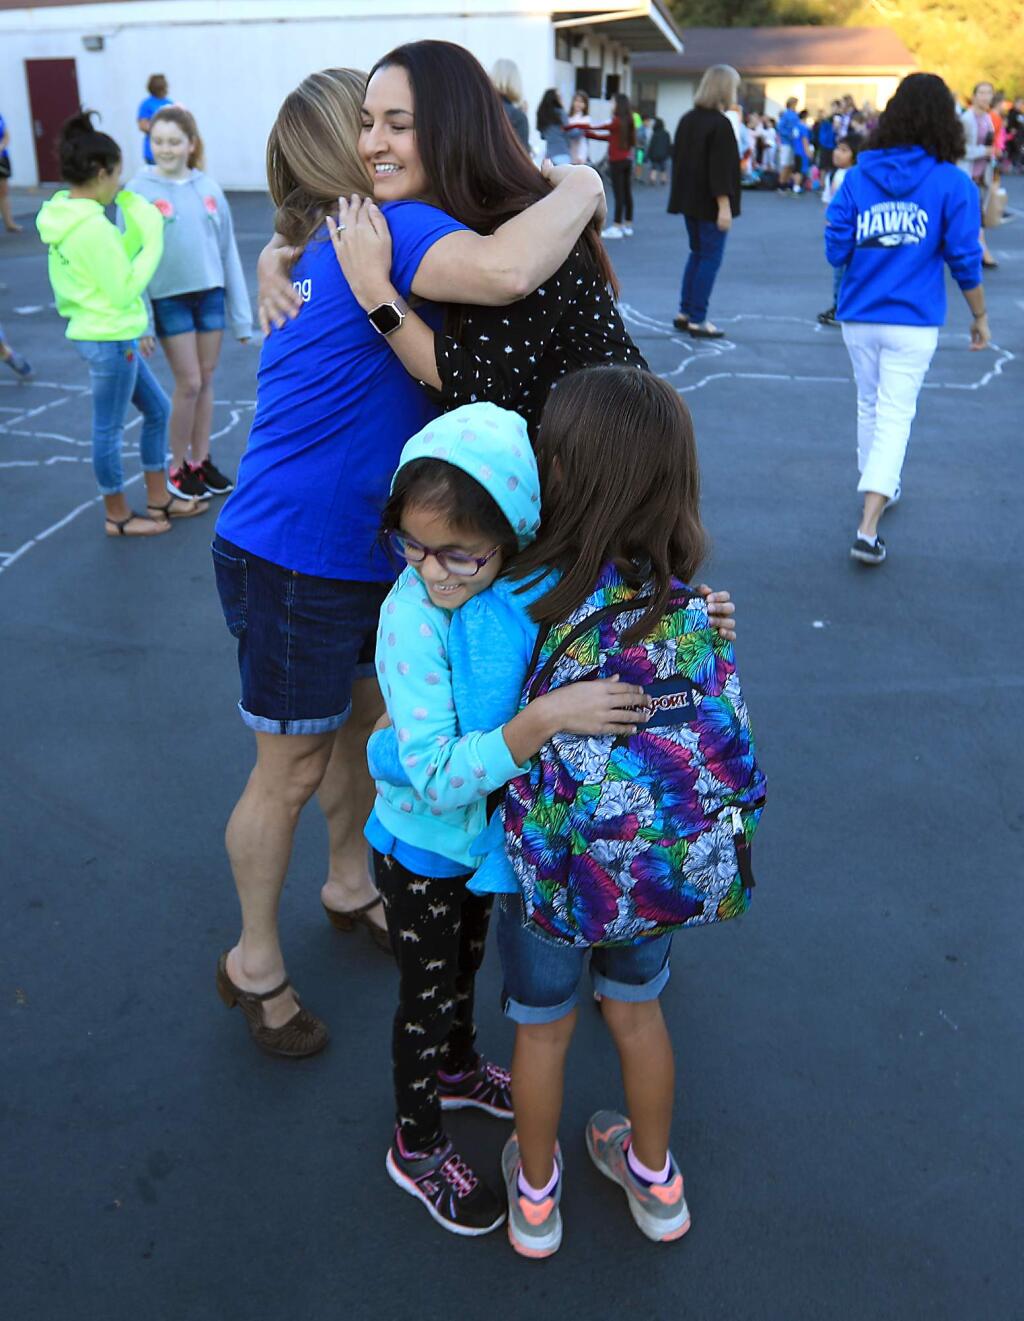 Marla Apodaca, Heidi Facciano, Maya Apodaca, 7, and Dania Farooqui 6, embrace at Hidden Valley Elementary School after it reopened nearly three weeks after the Tubbs fire razed portions of Santa Rosa, Friday Oct. 27, 2017. (Kent Porter / Press Democrat) 2017